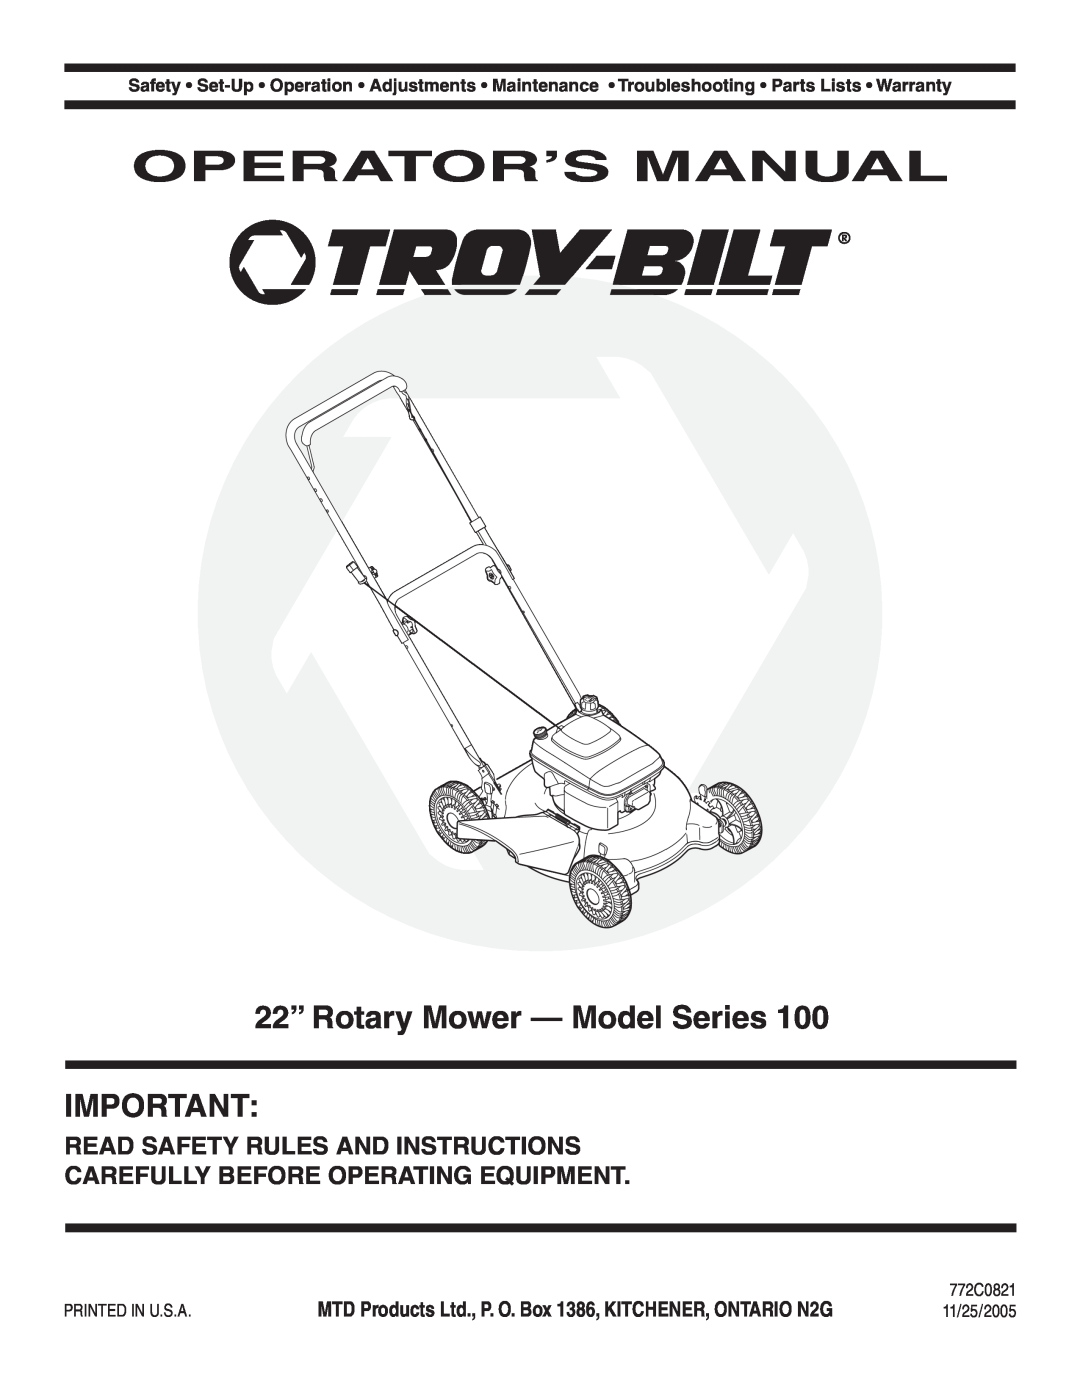 Troy-Bilt 100 warranty Operator’S Manual, 22” Rotary Mower - Model Series, Read Safety Rules And Instructions 